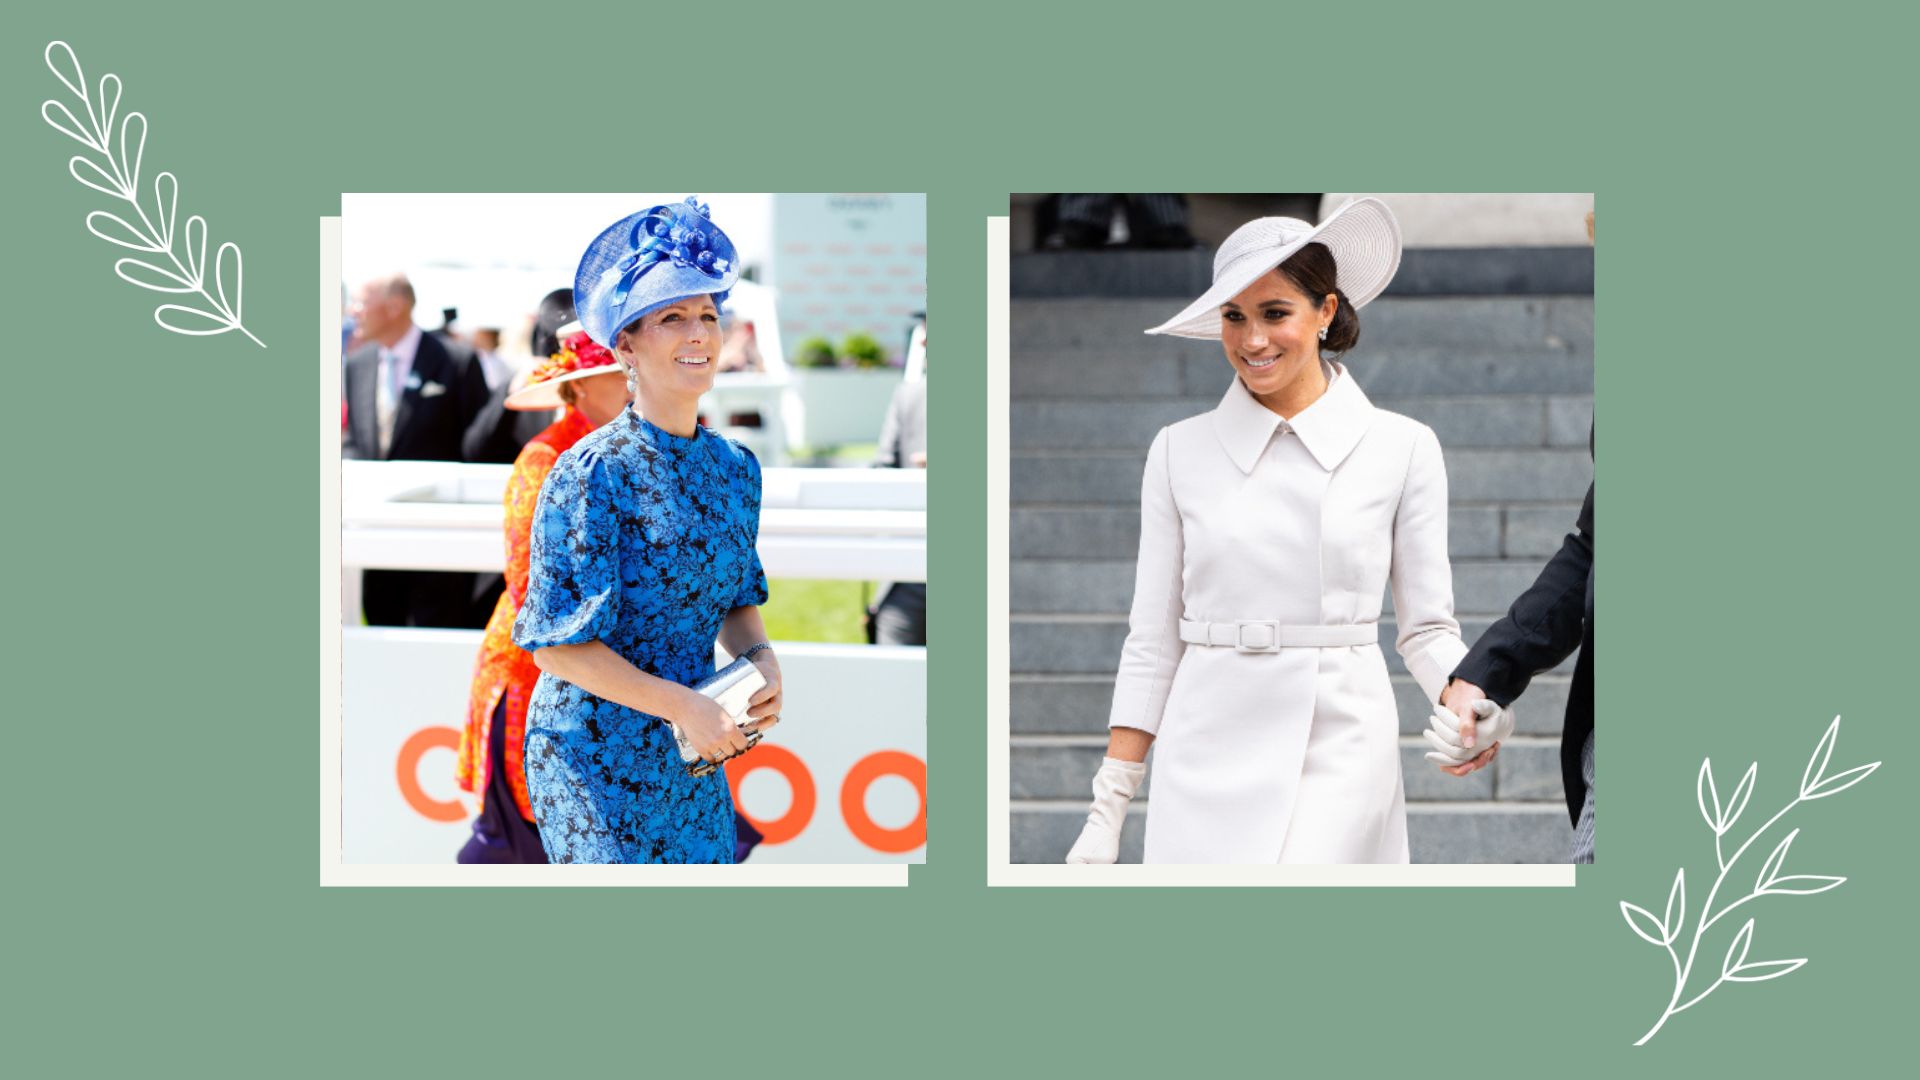 How to wear a hat: Style tips and tricks from the experts